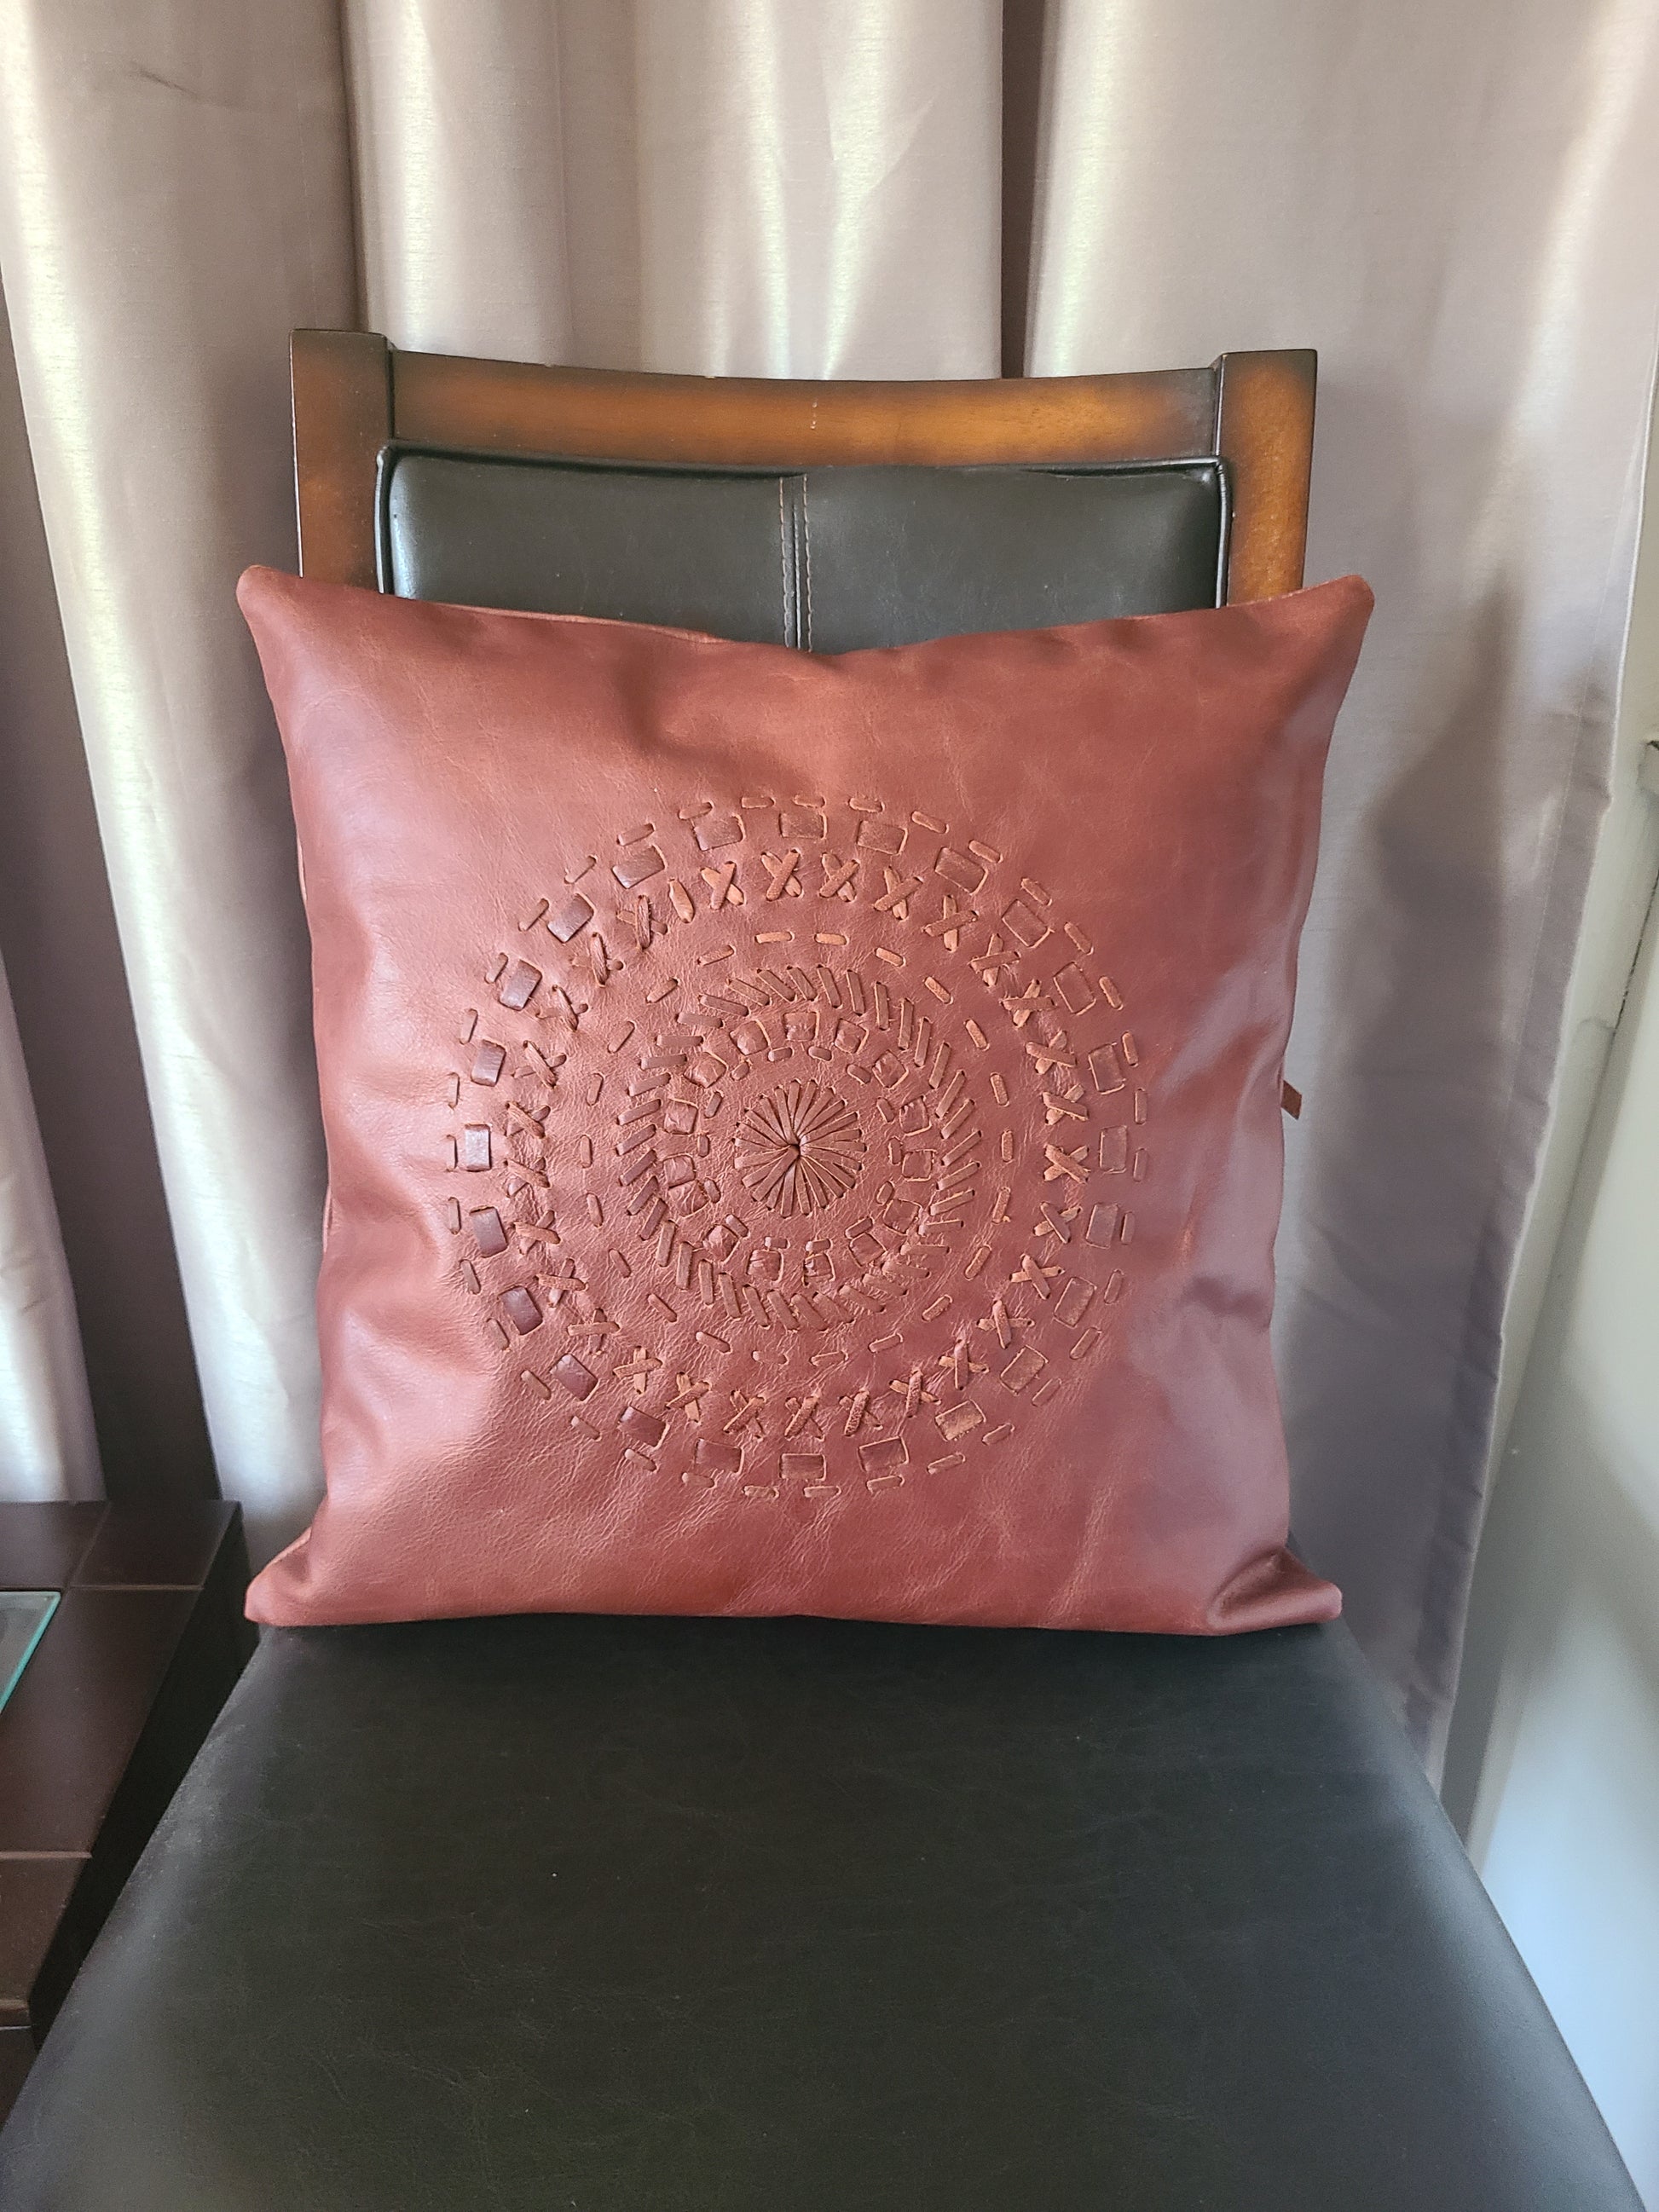 100% Leather Cognac Red Mandala Throw Pillow Cover - 18 x 18-Status Co. Leather Studio